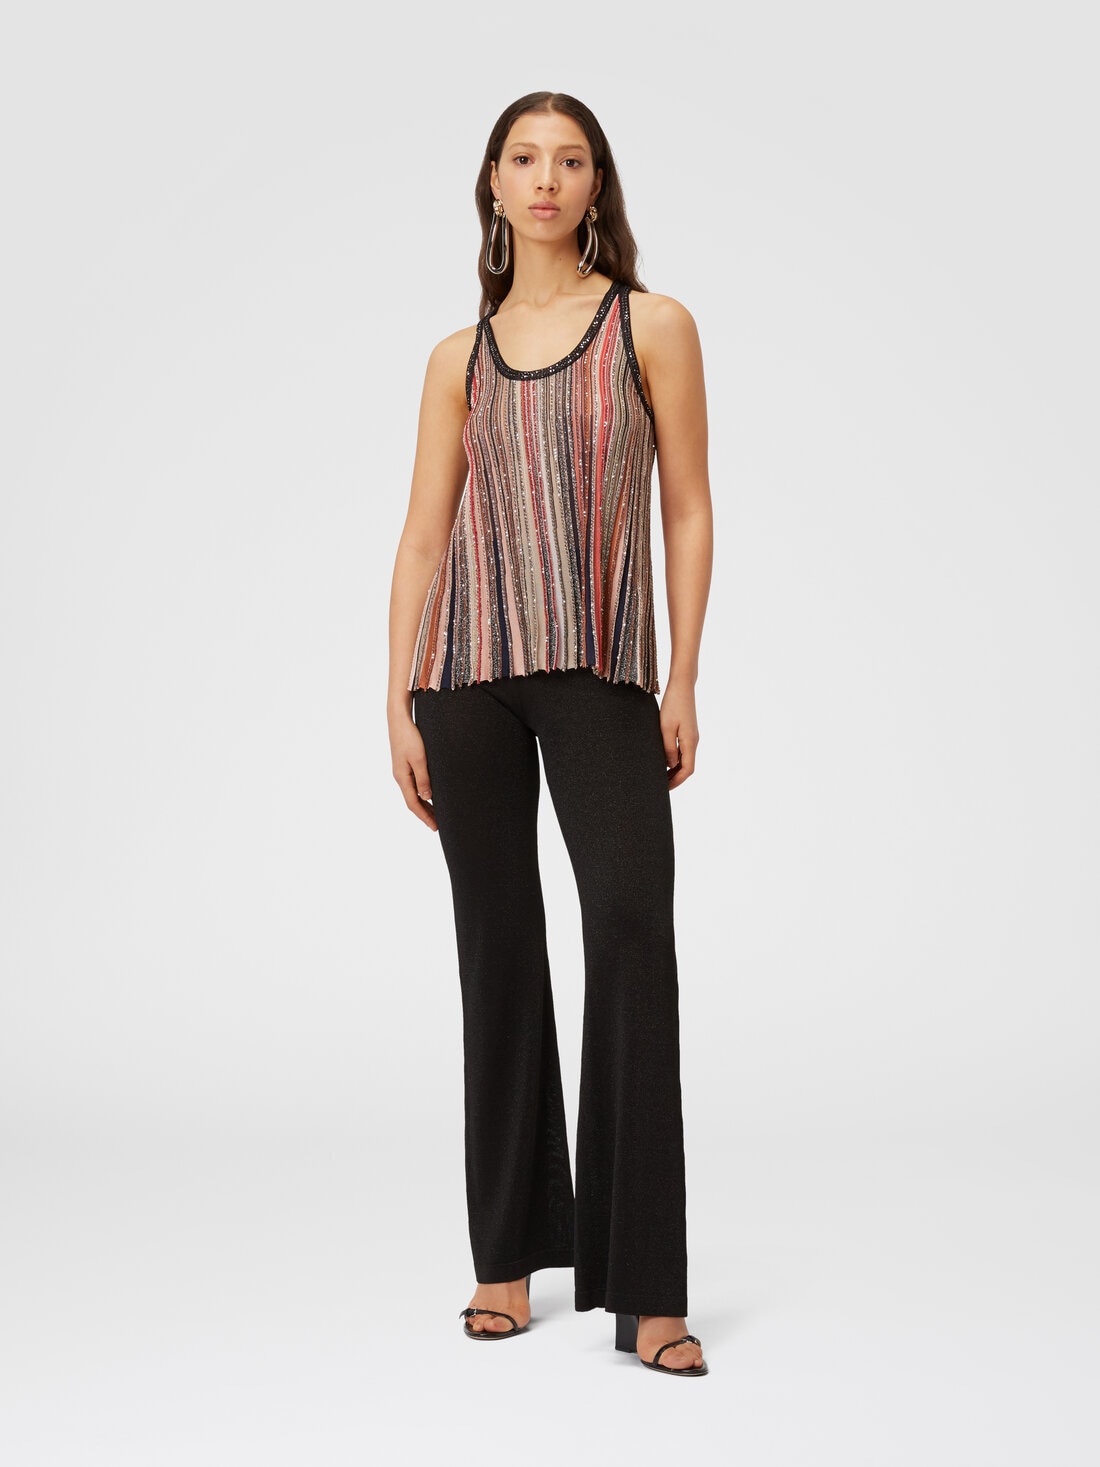 Tank top in vertical striped knit with sequins , Multicoloured  - DS24SK01BK033MSM9AF - 1